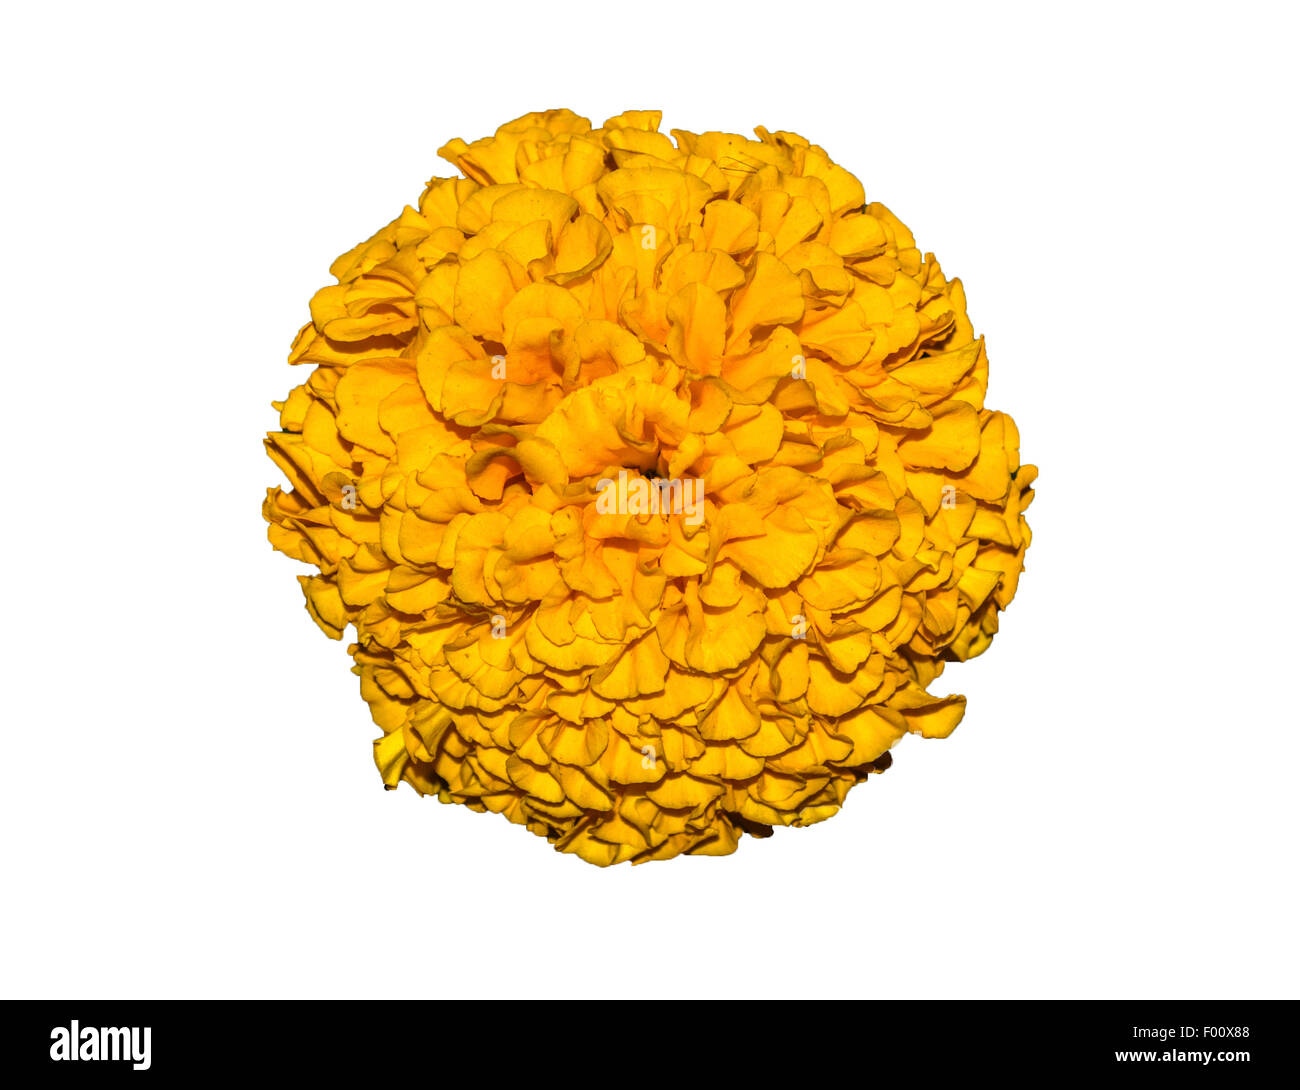 Cut-out of yellow marigold flower isolated on white background. Stock Photo